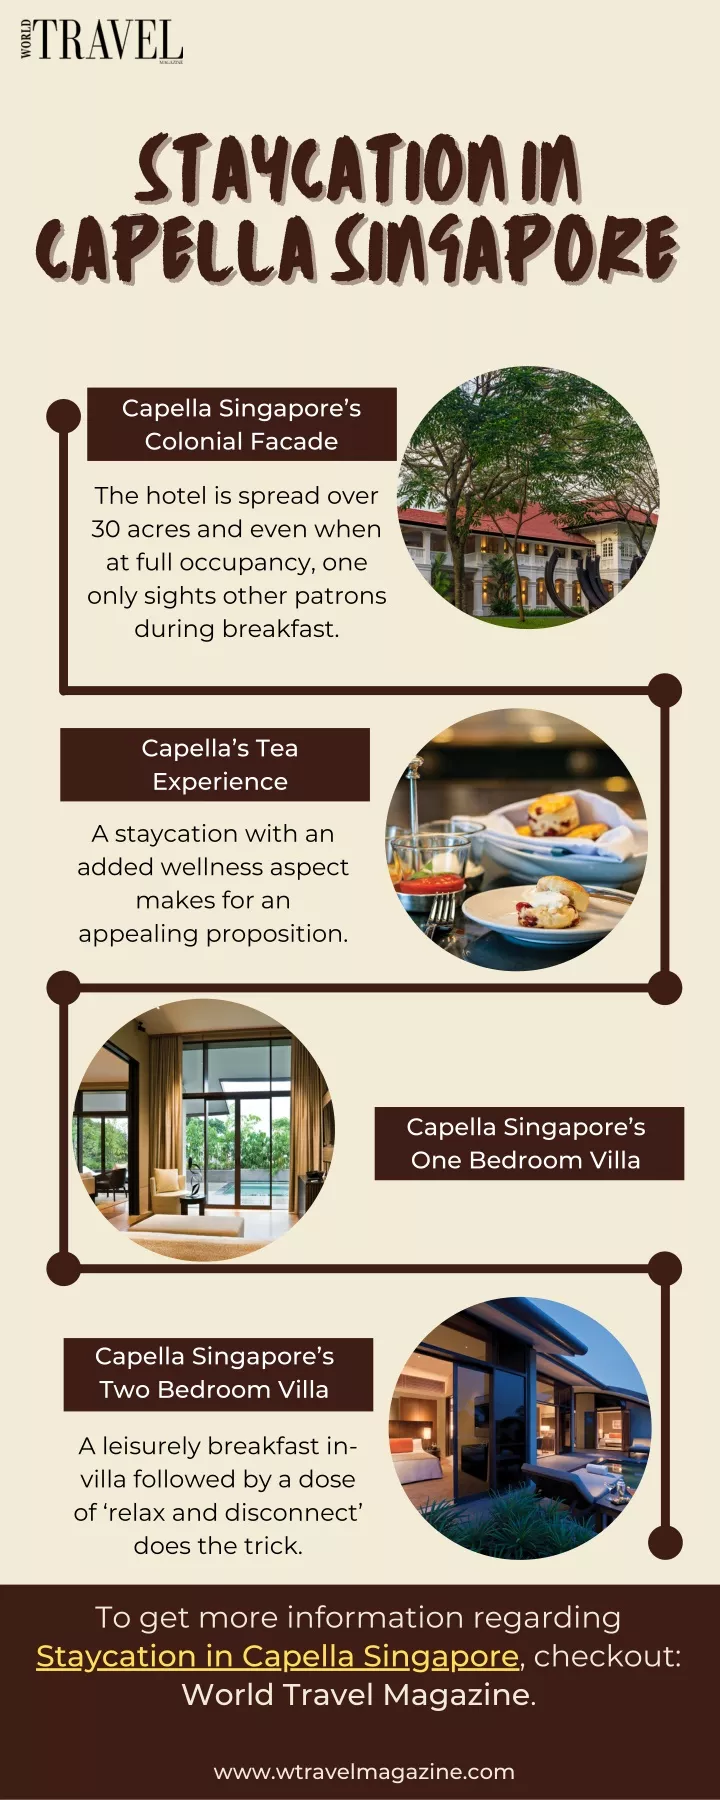 staycation in staycation in capella singapore